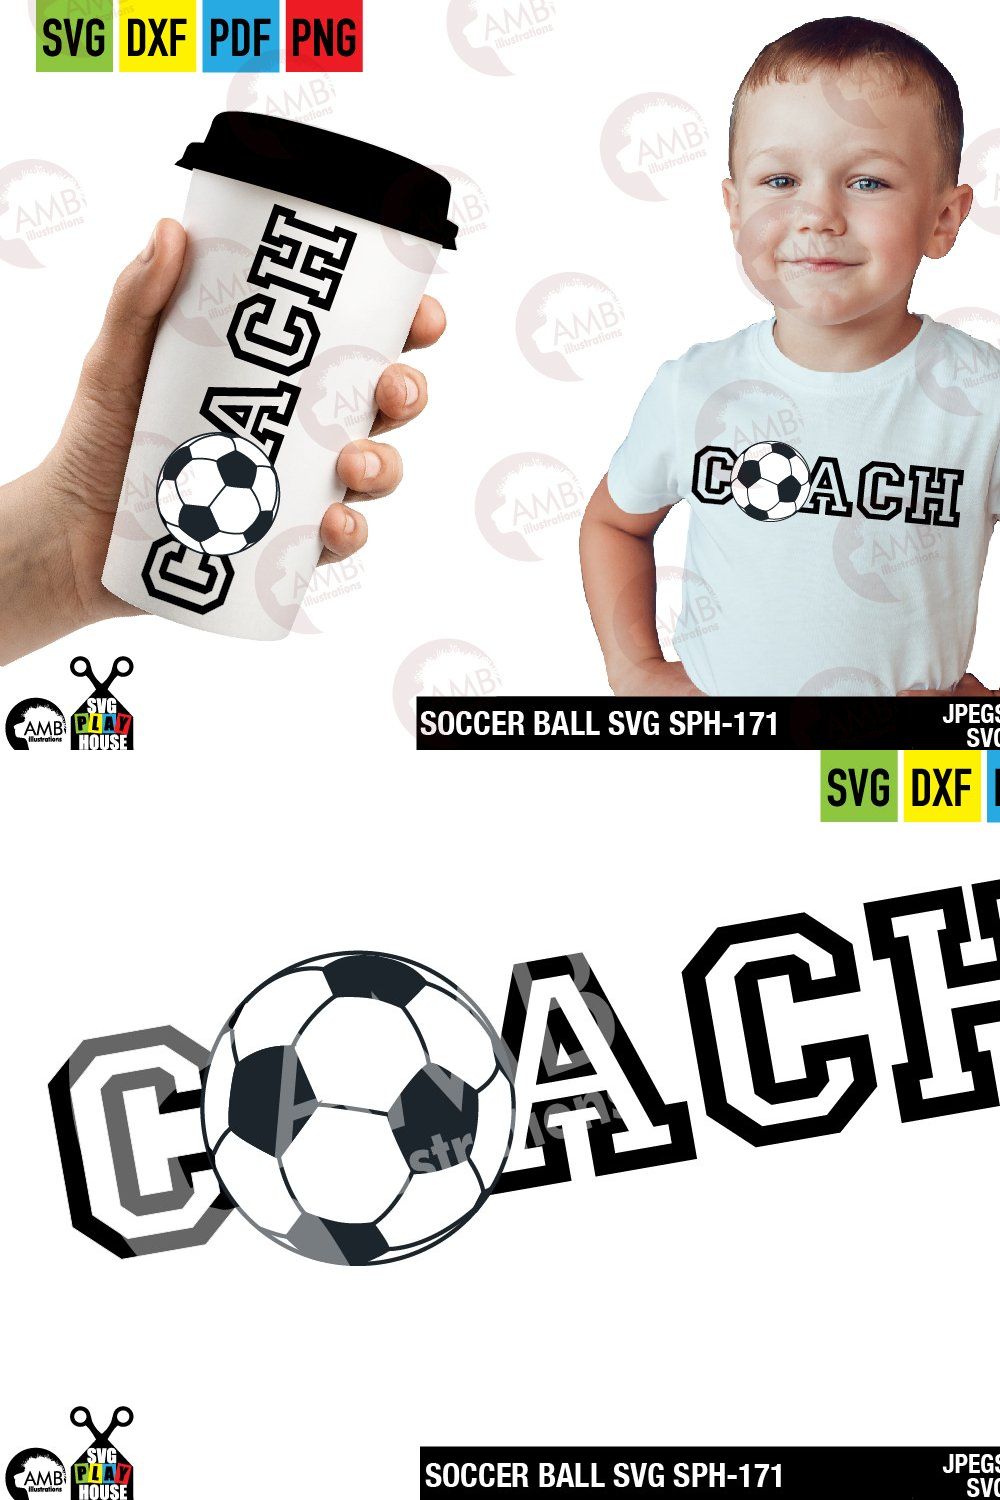 Coach, soccer ball SPH-172 pinterest preview image.